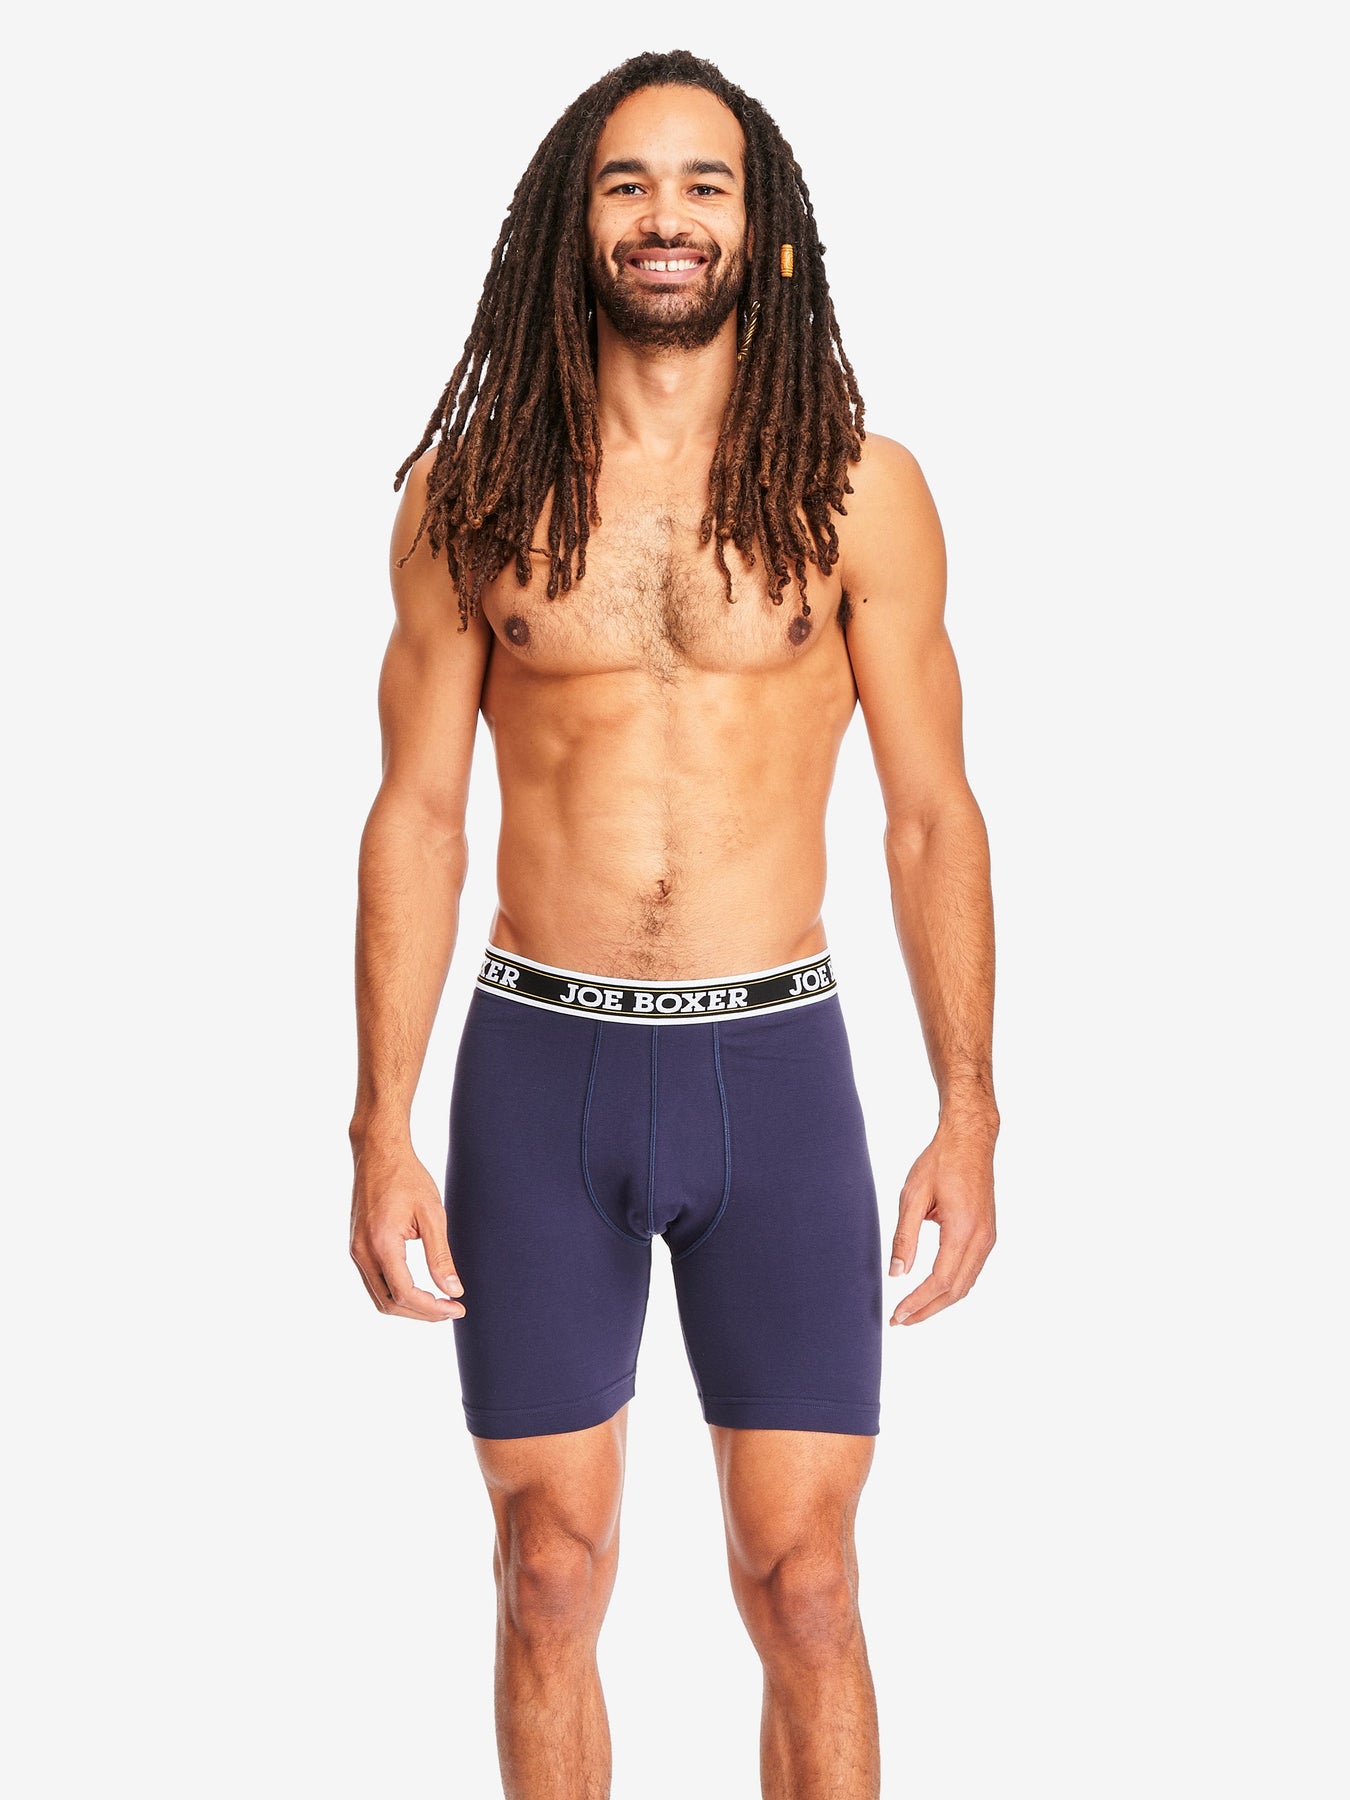 Shop Cycling Underwear Men with great discounts and prices online